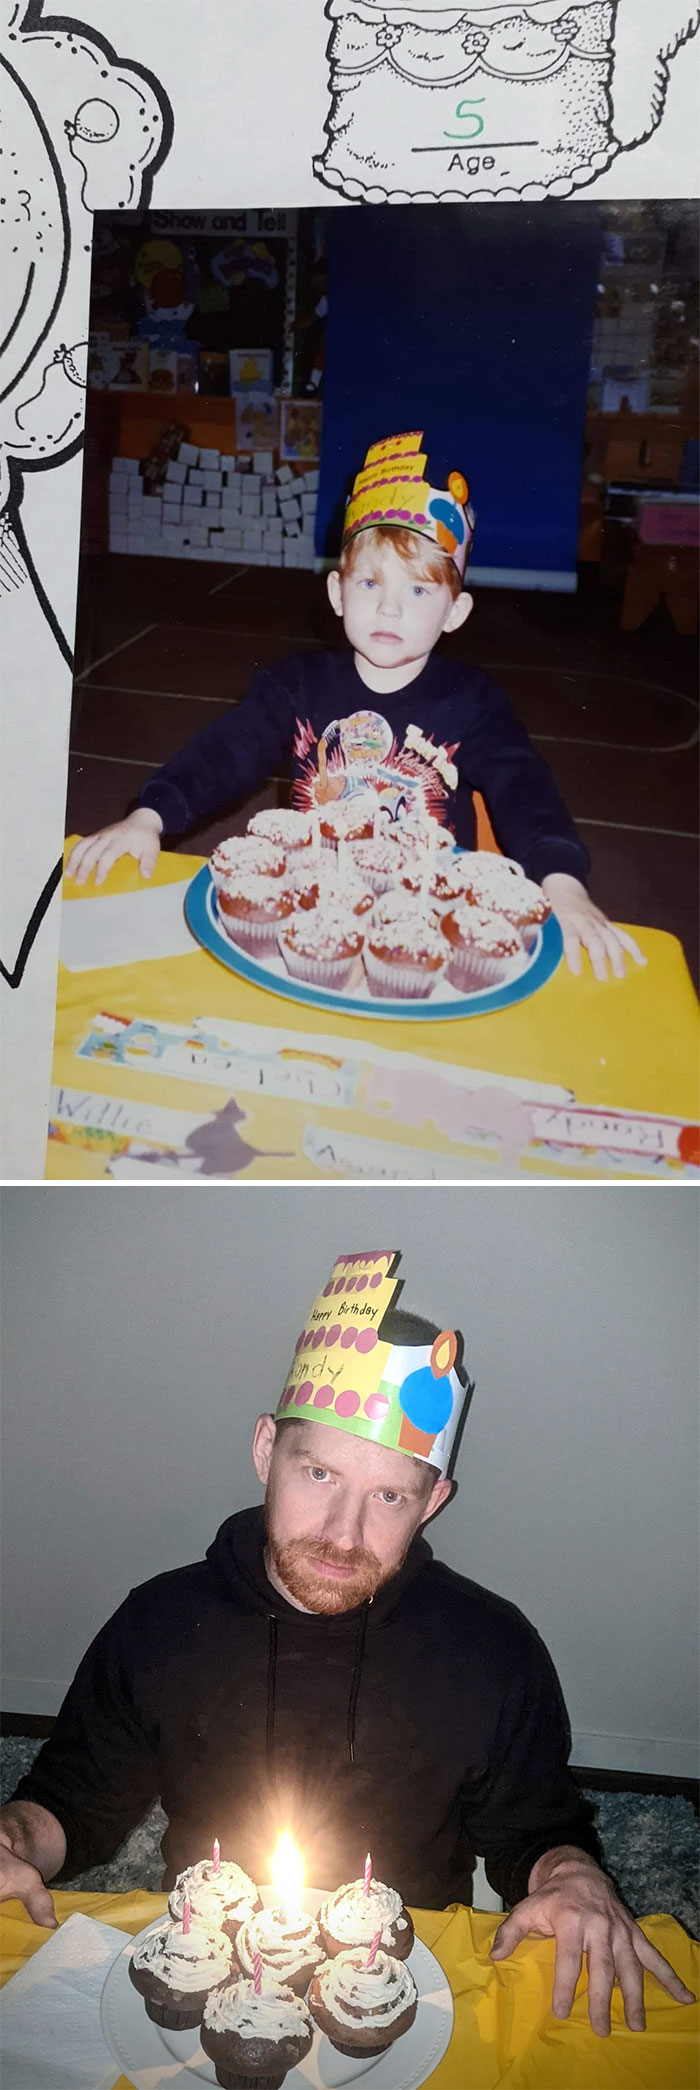 My Unhappy 5th Birthday In 1993, Recreated Today For My 34th